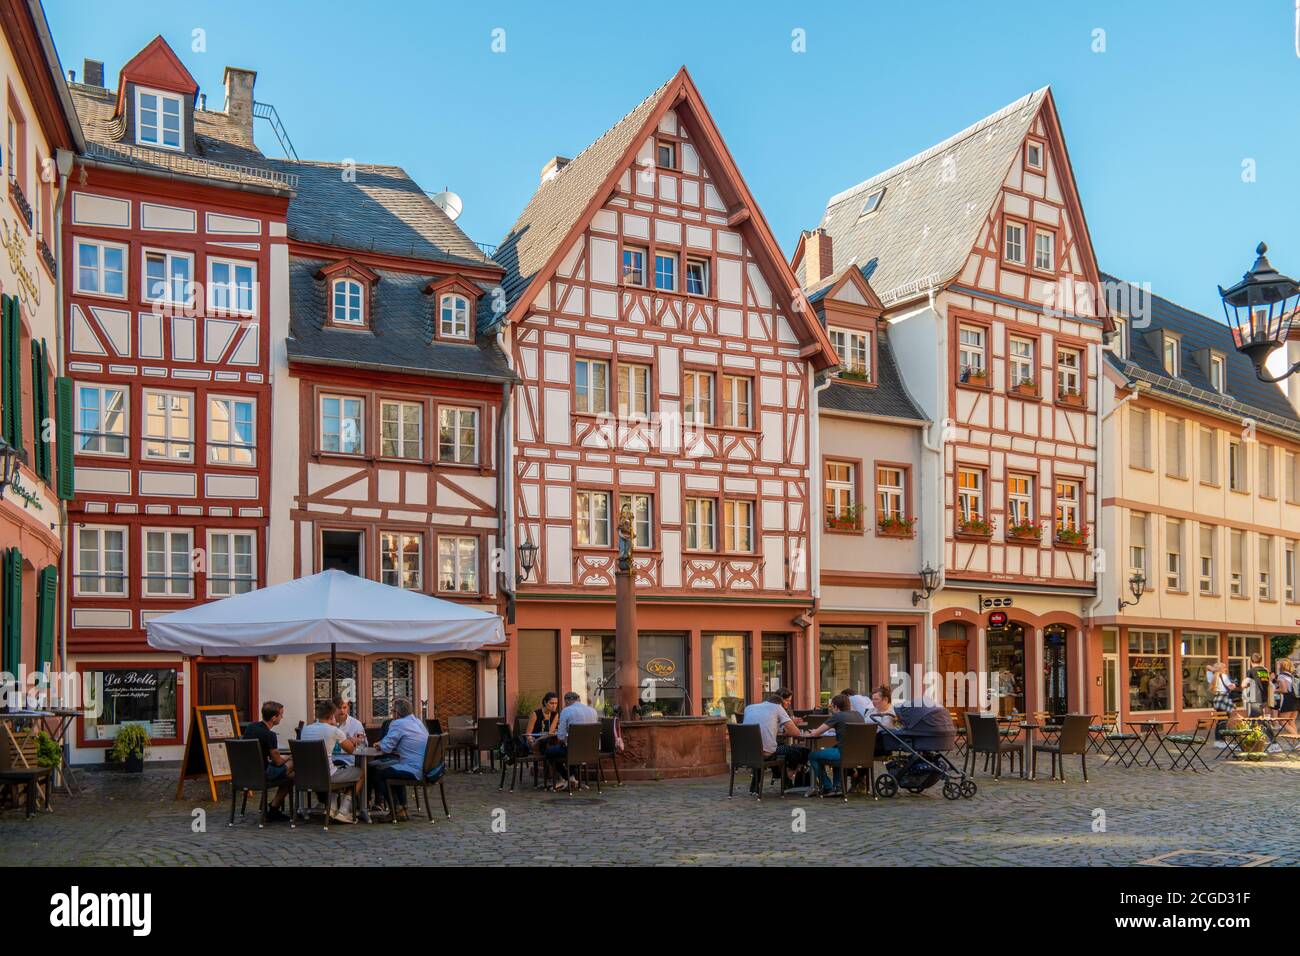 Mainz Germany August 2020, Classical timber houses in the center of Mainz, Germany Stock Photo